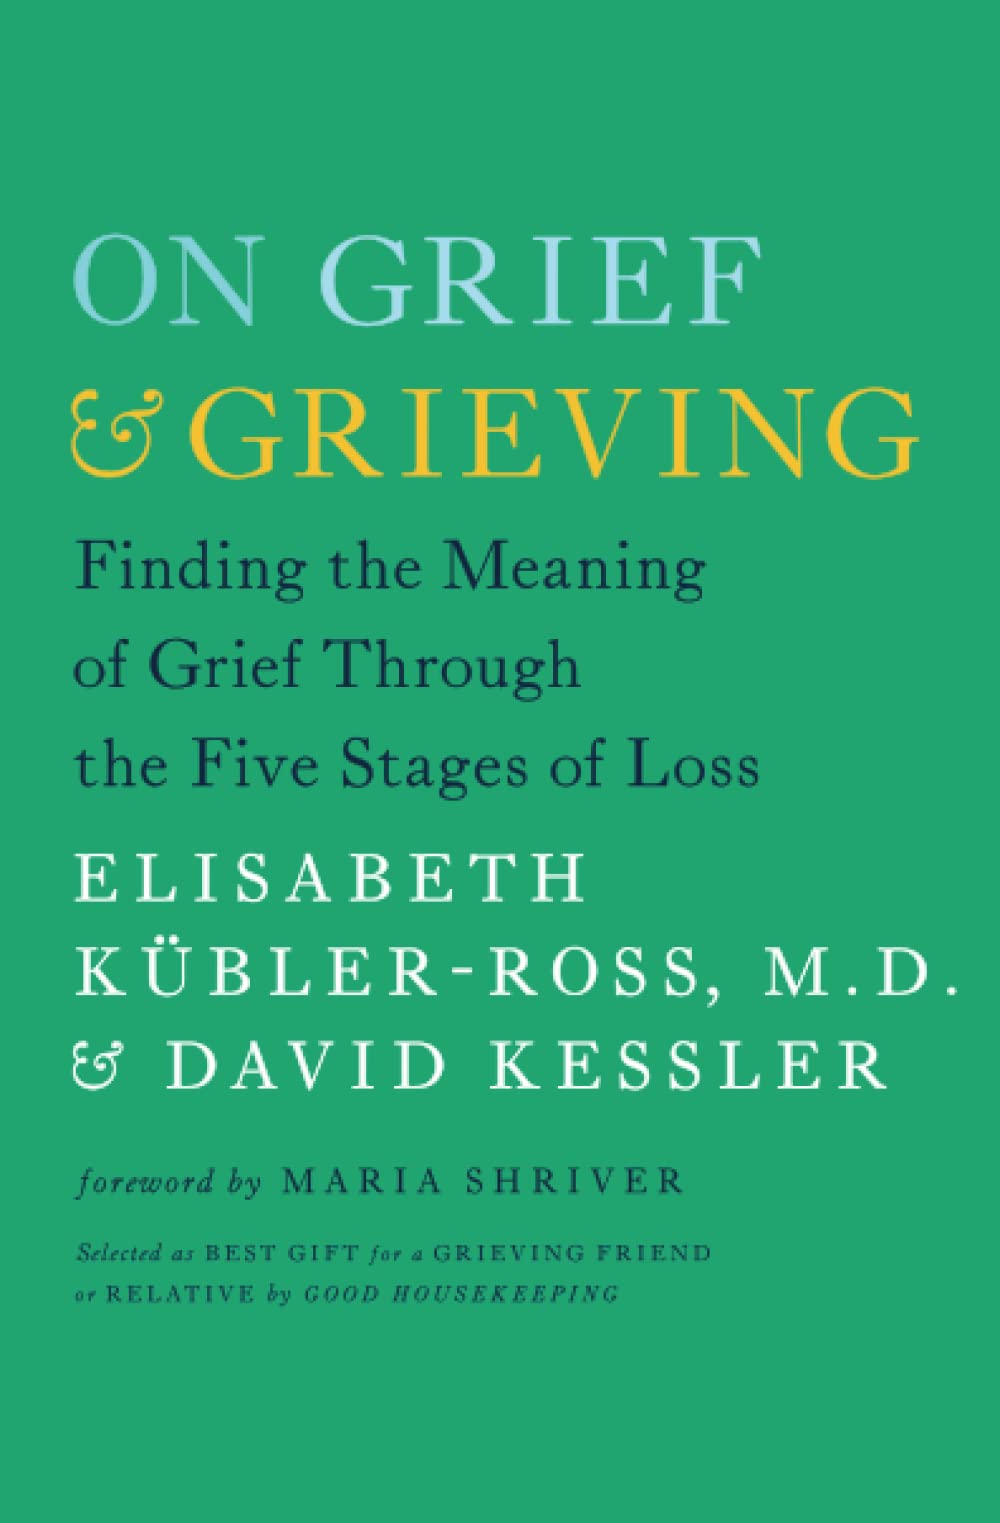 titles for essays about losing a loved one